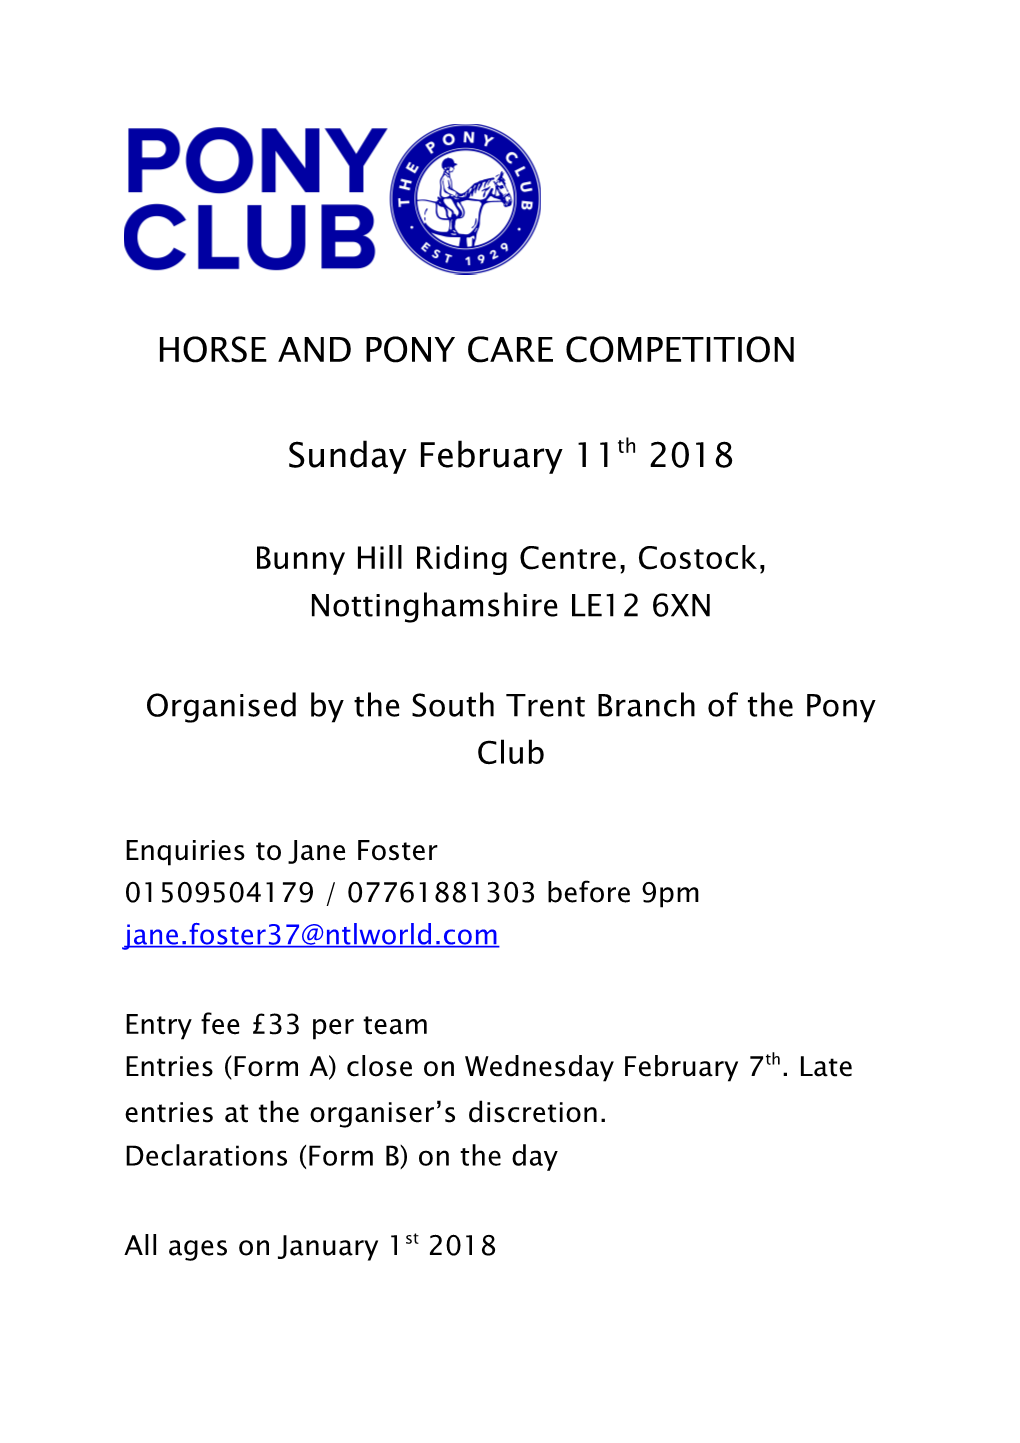 Horse and Pony Care Competition